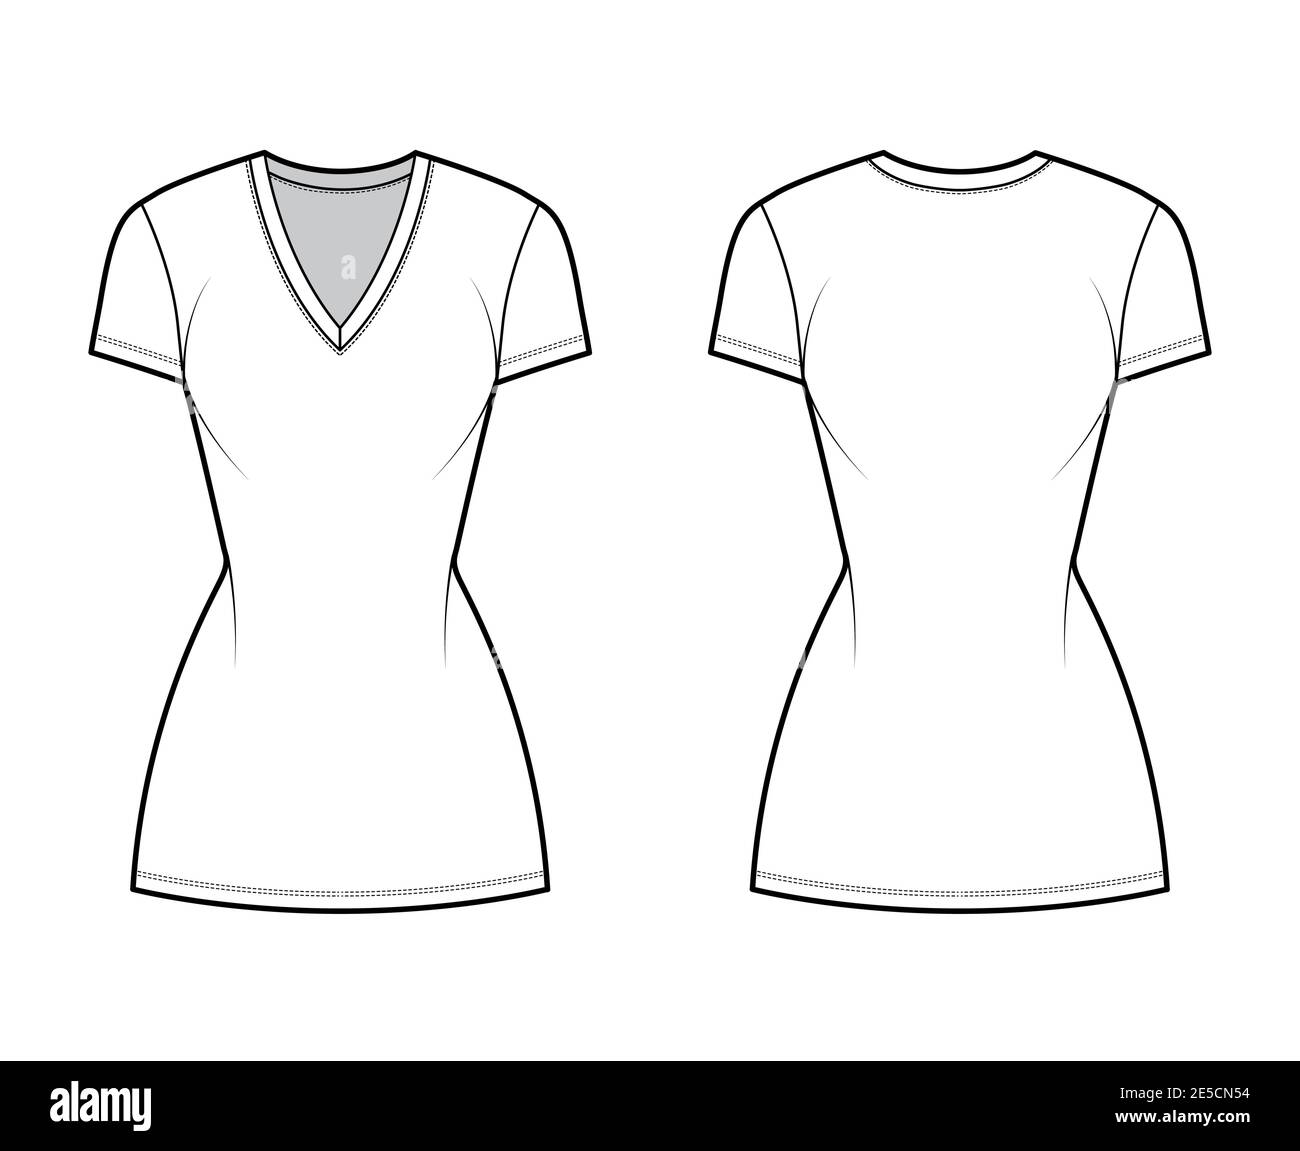 T-shirt dress technical fashion illustration with V-neck, short sleeves, mini length, fitted body, Pencil fullness. Flat apparel template front, back, white color. Women, men, unisex CAD mockup Stock Vector